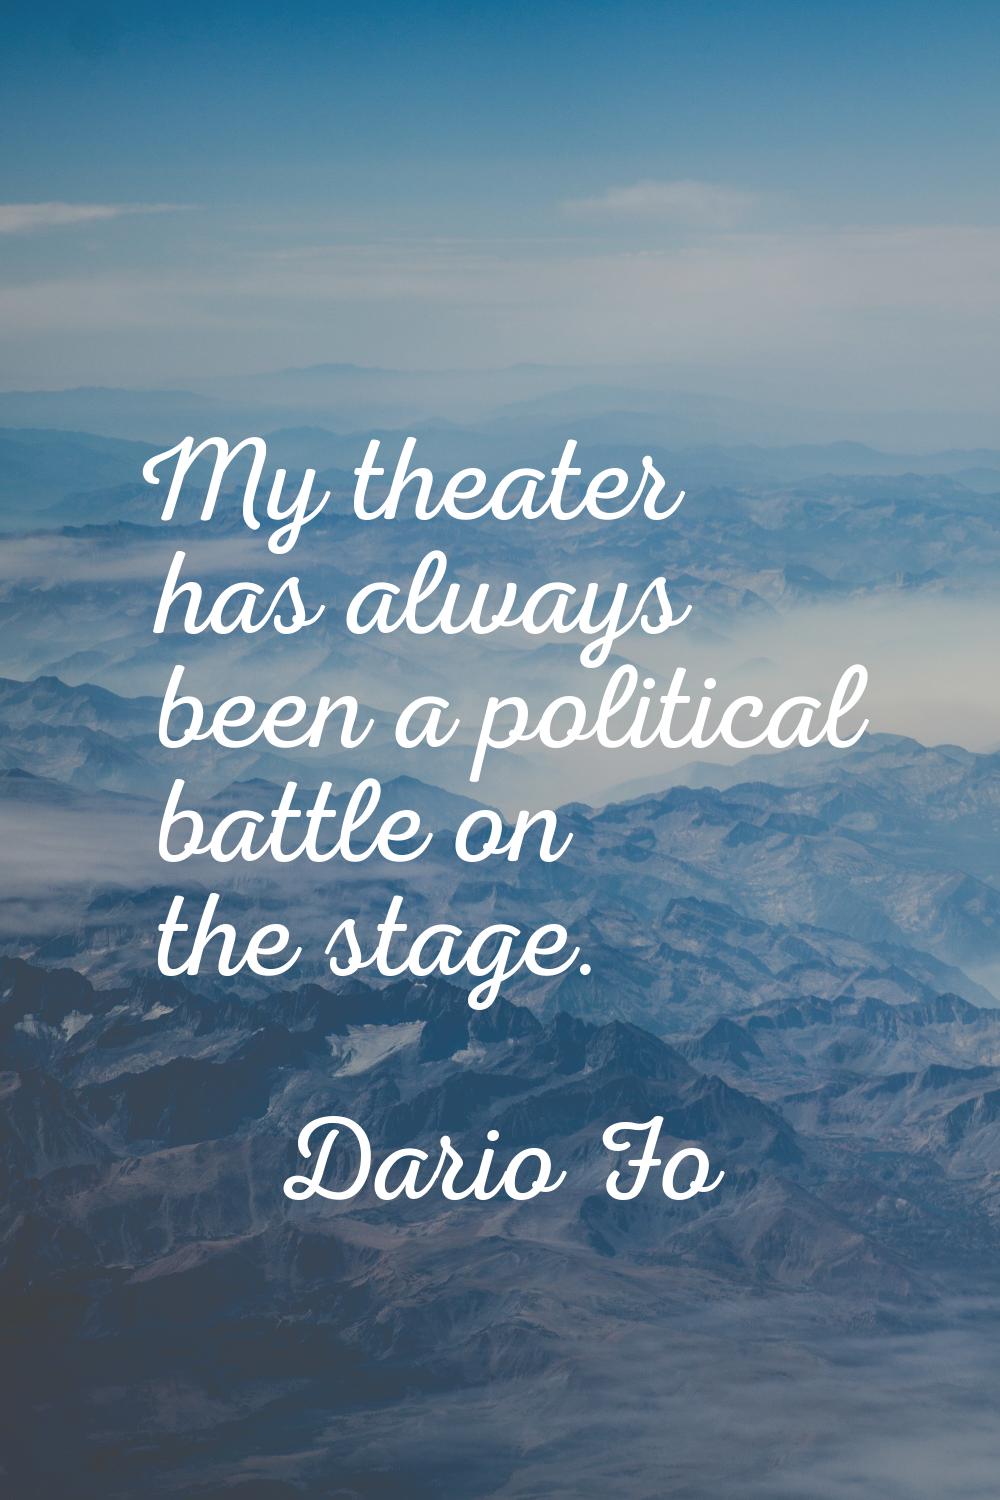 My theater has always been a political battle on the stage.